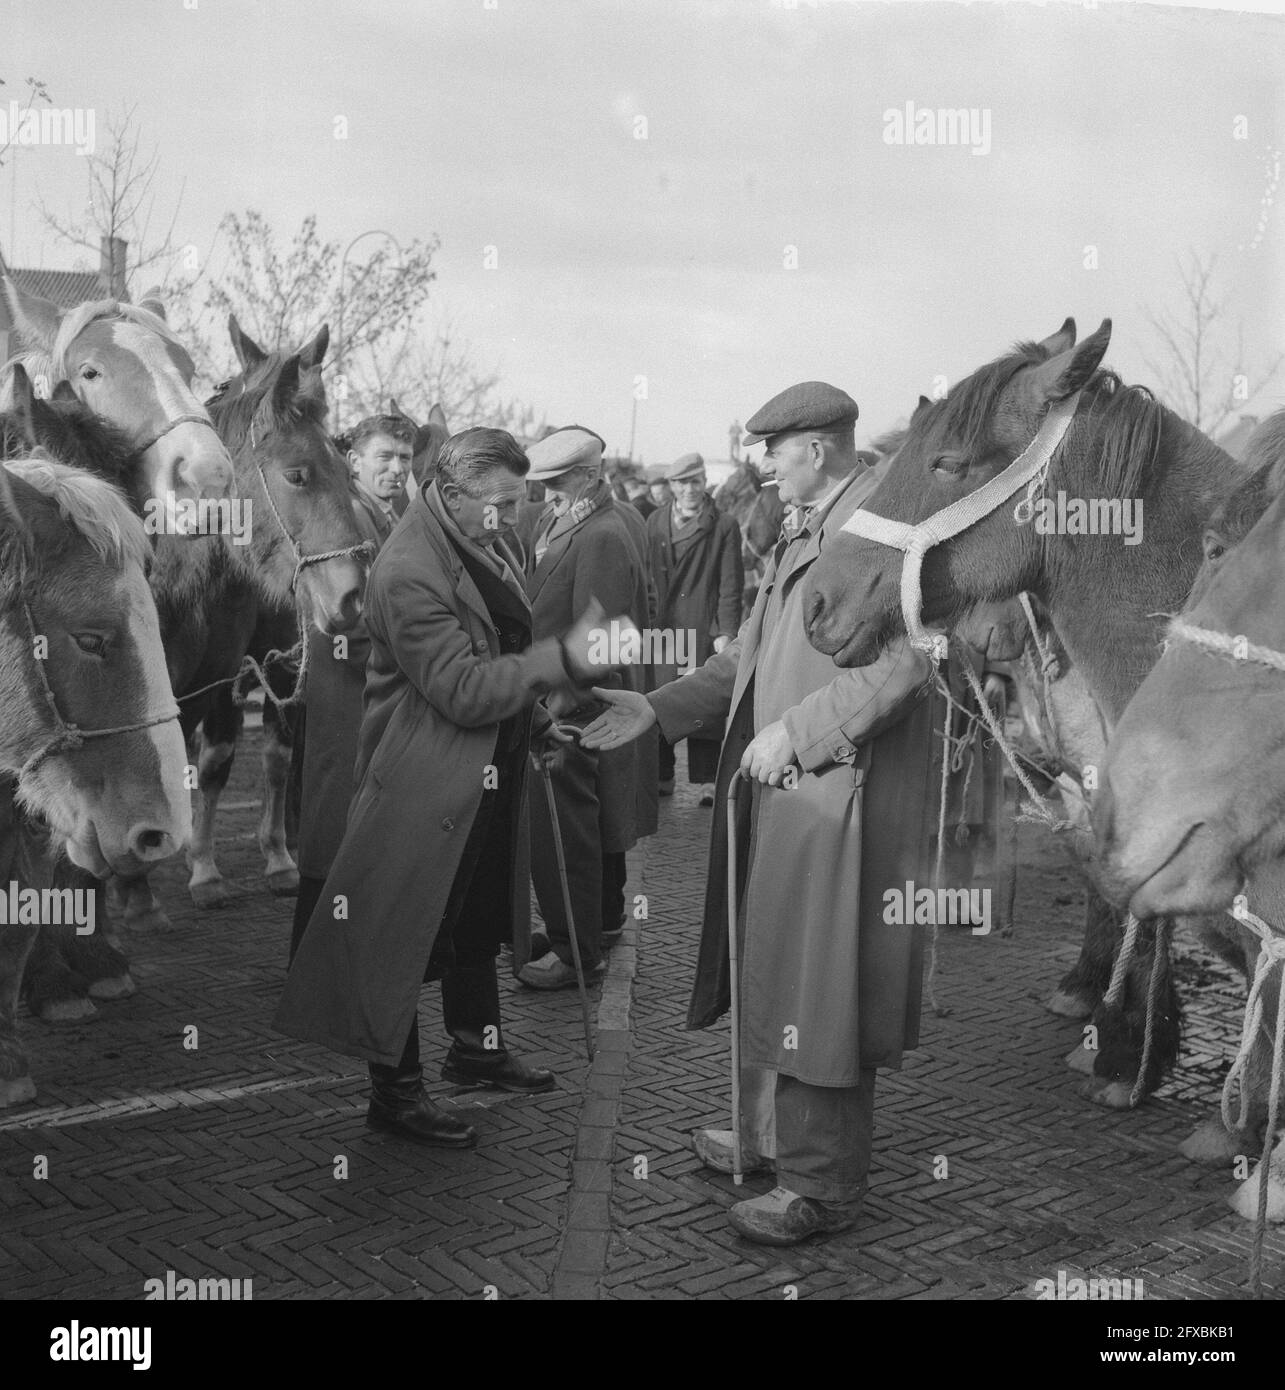 Annual horse market at Hedel, 7 November 1960, horse markets, The Netherlands, 20th century press agency photo, news to remember, documentary, historic photography 1945-1990, visual stories, human history of the Twentieth Century, capturing moments in time Stock Photo